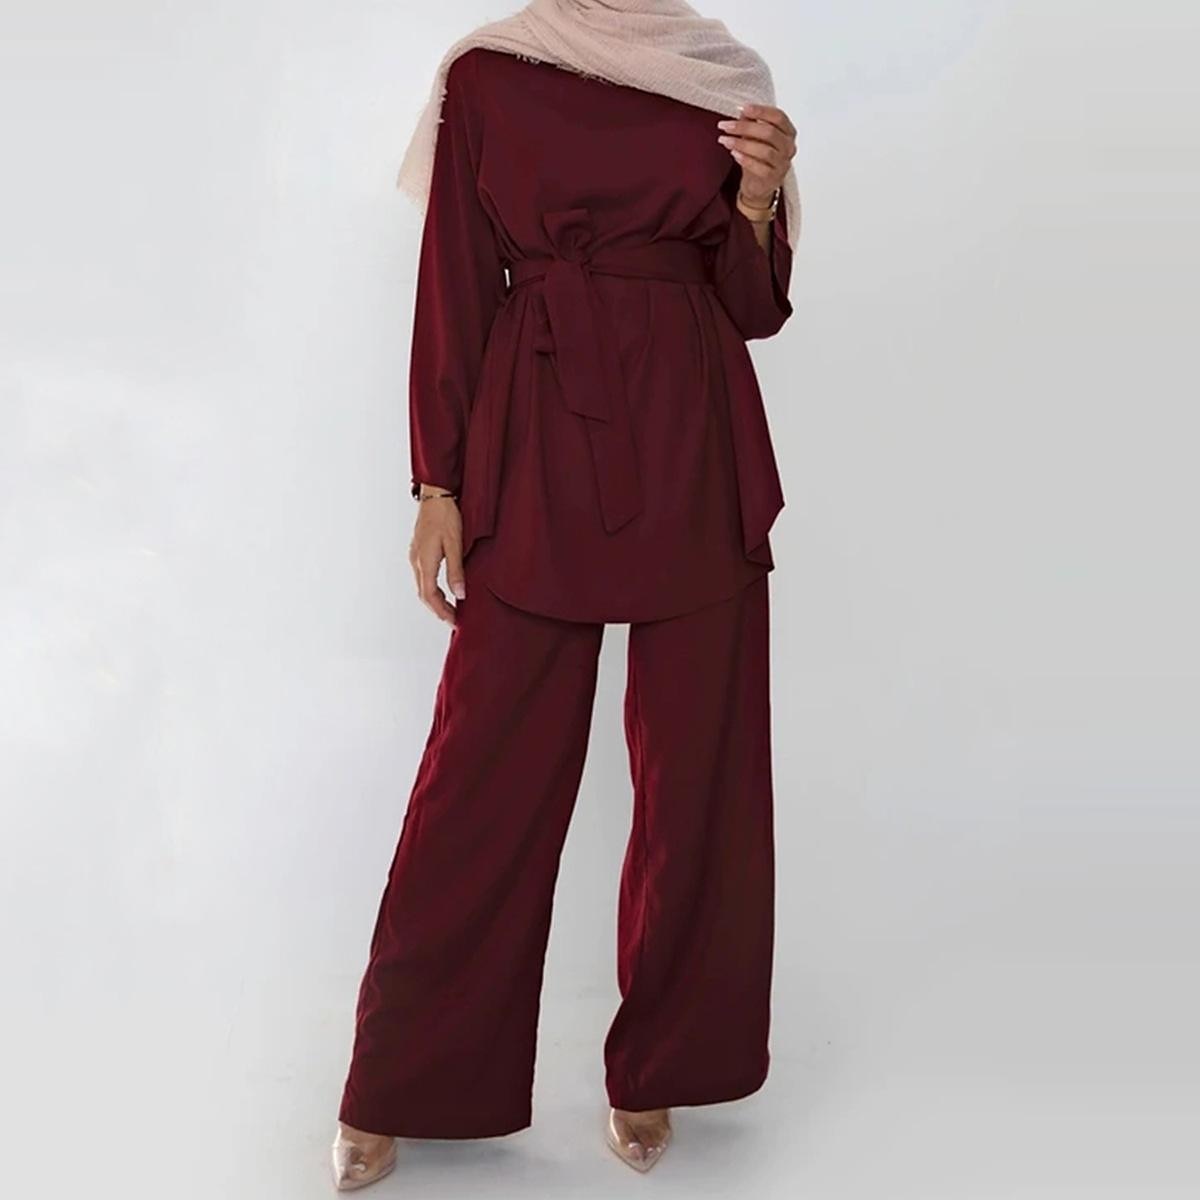 Cotton Crepe Long Trousers Elastic Waist Wide Legs Palazzo Pants Muslim  Women Bottoms Casual Solid Modest Outfits (No Abaya) - AliExpress